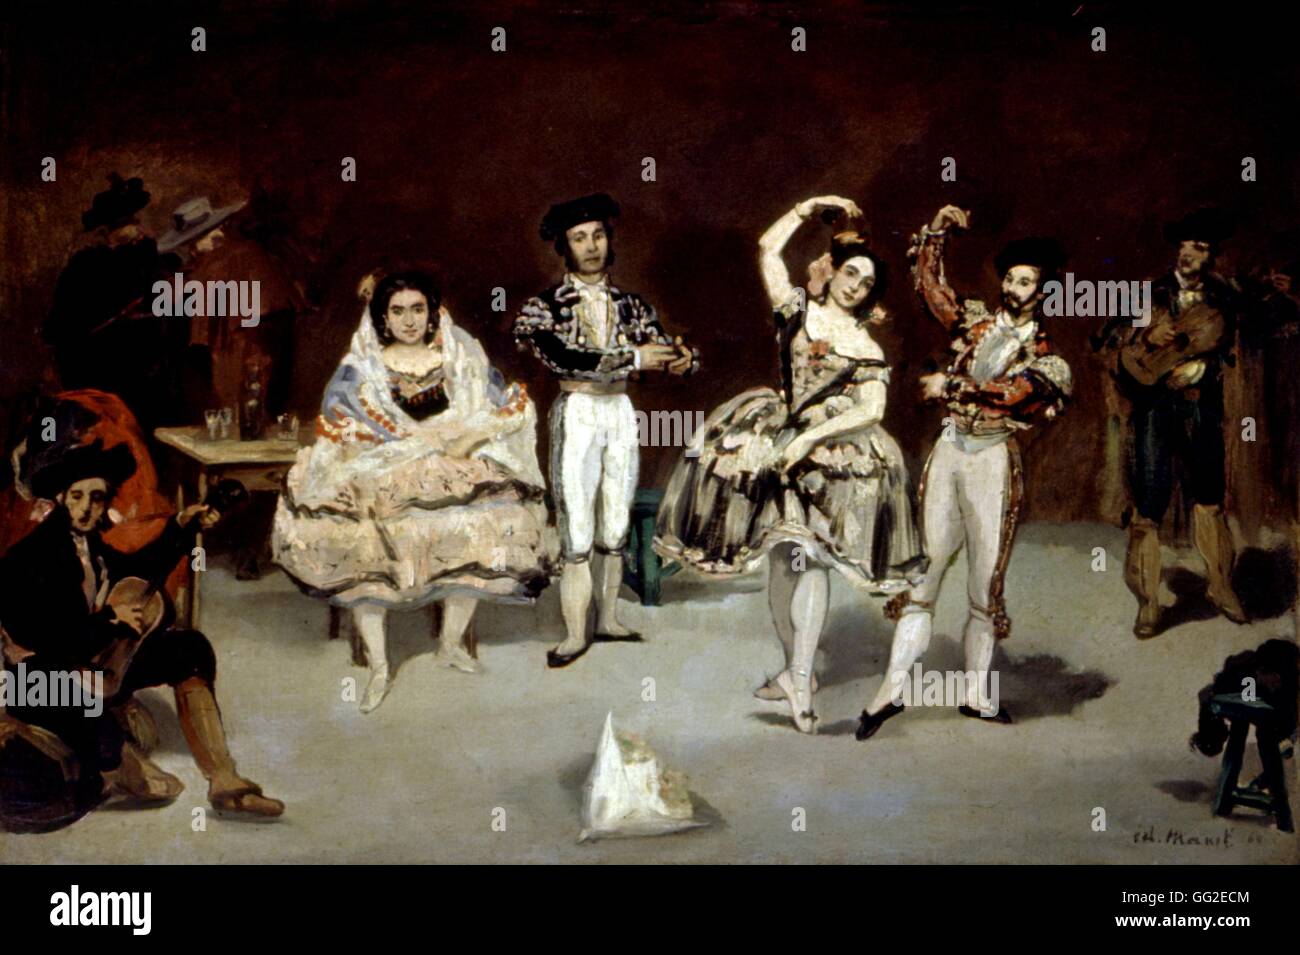 Edouard Manet French school Spanish Ballet 1862 Oil on canvas (60.9 x 90.4 cm) Washington, The Phillips Collection Stock Photo